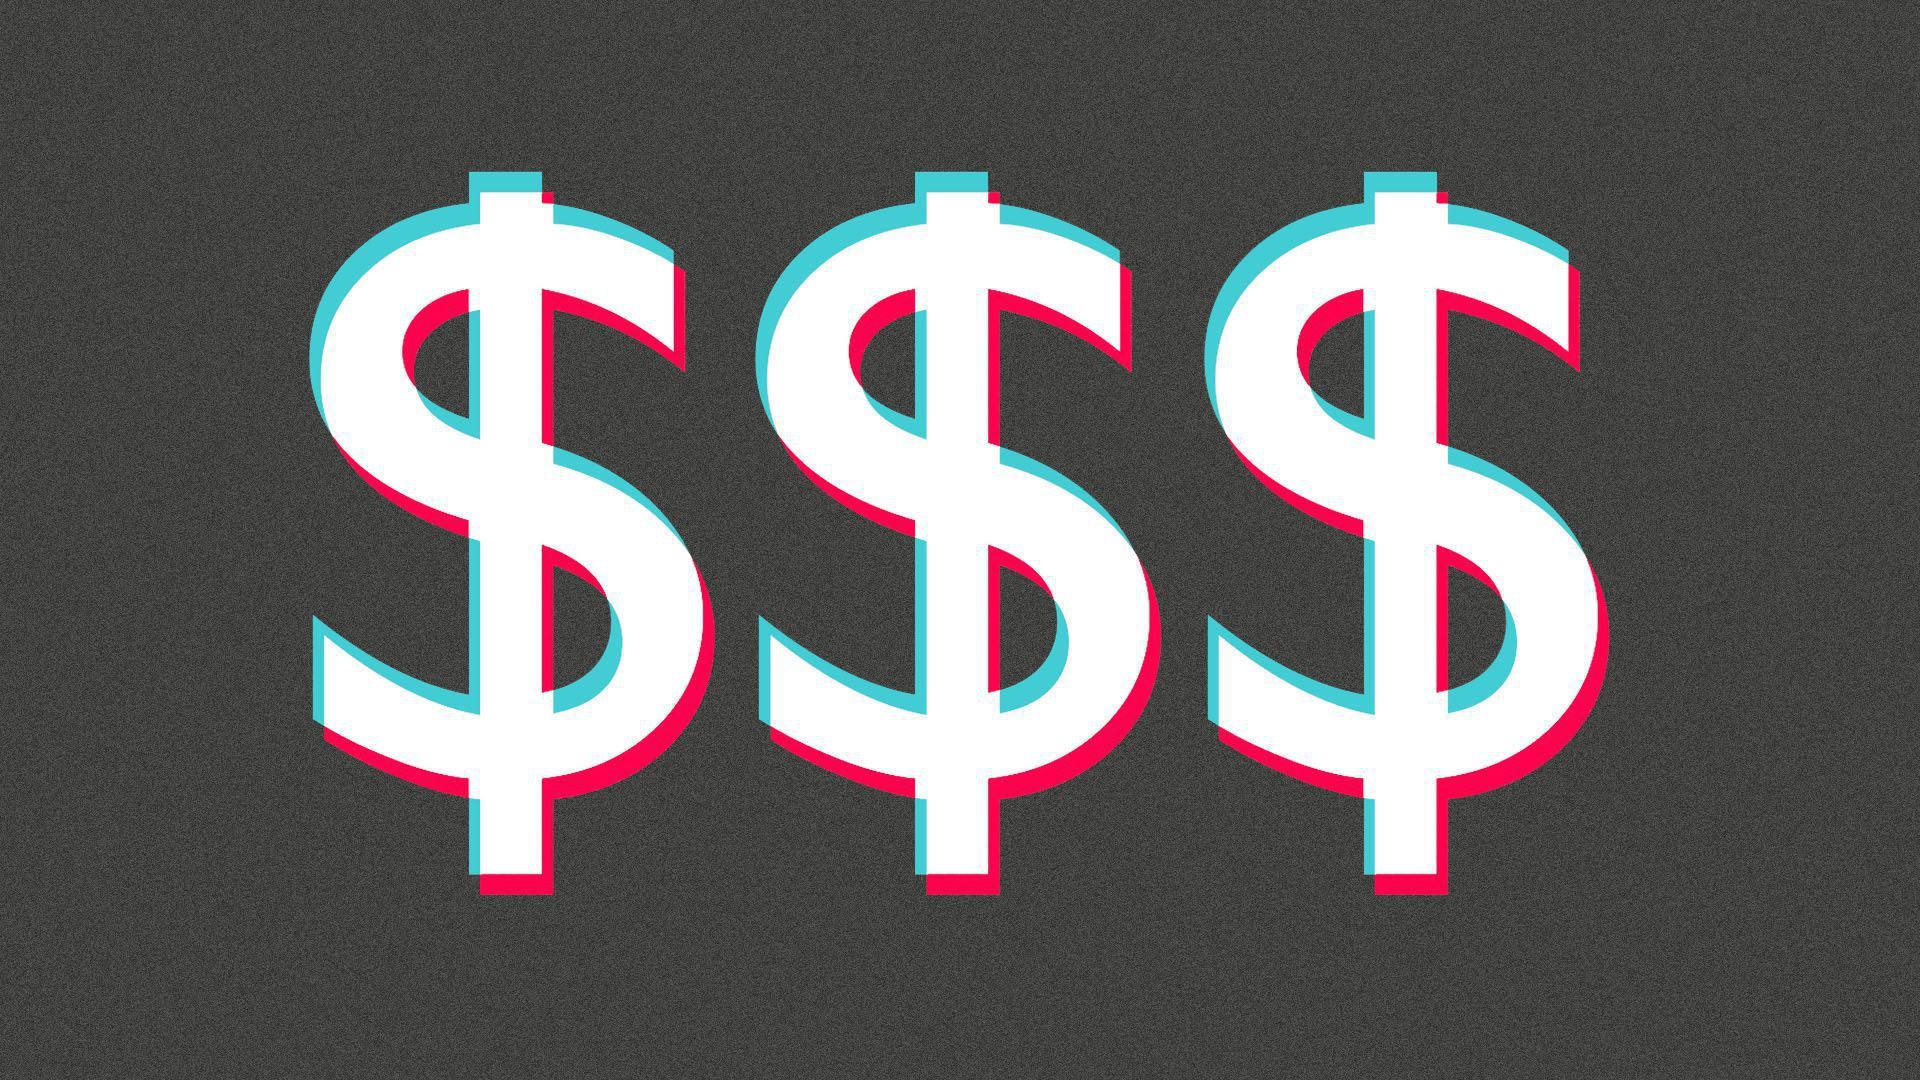 An illustration of money signs in the Tik Tok font.